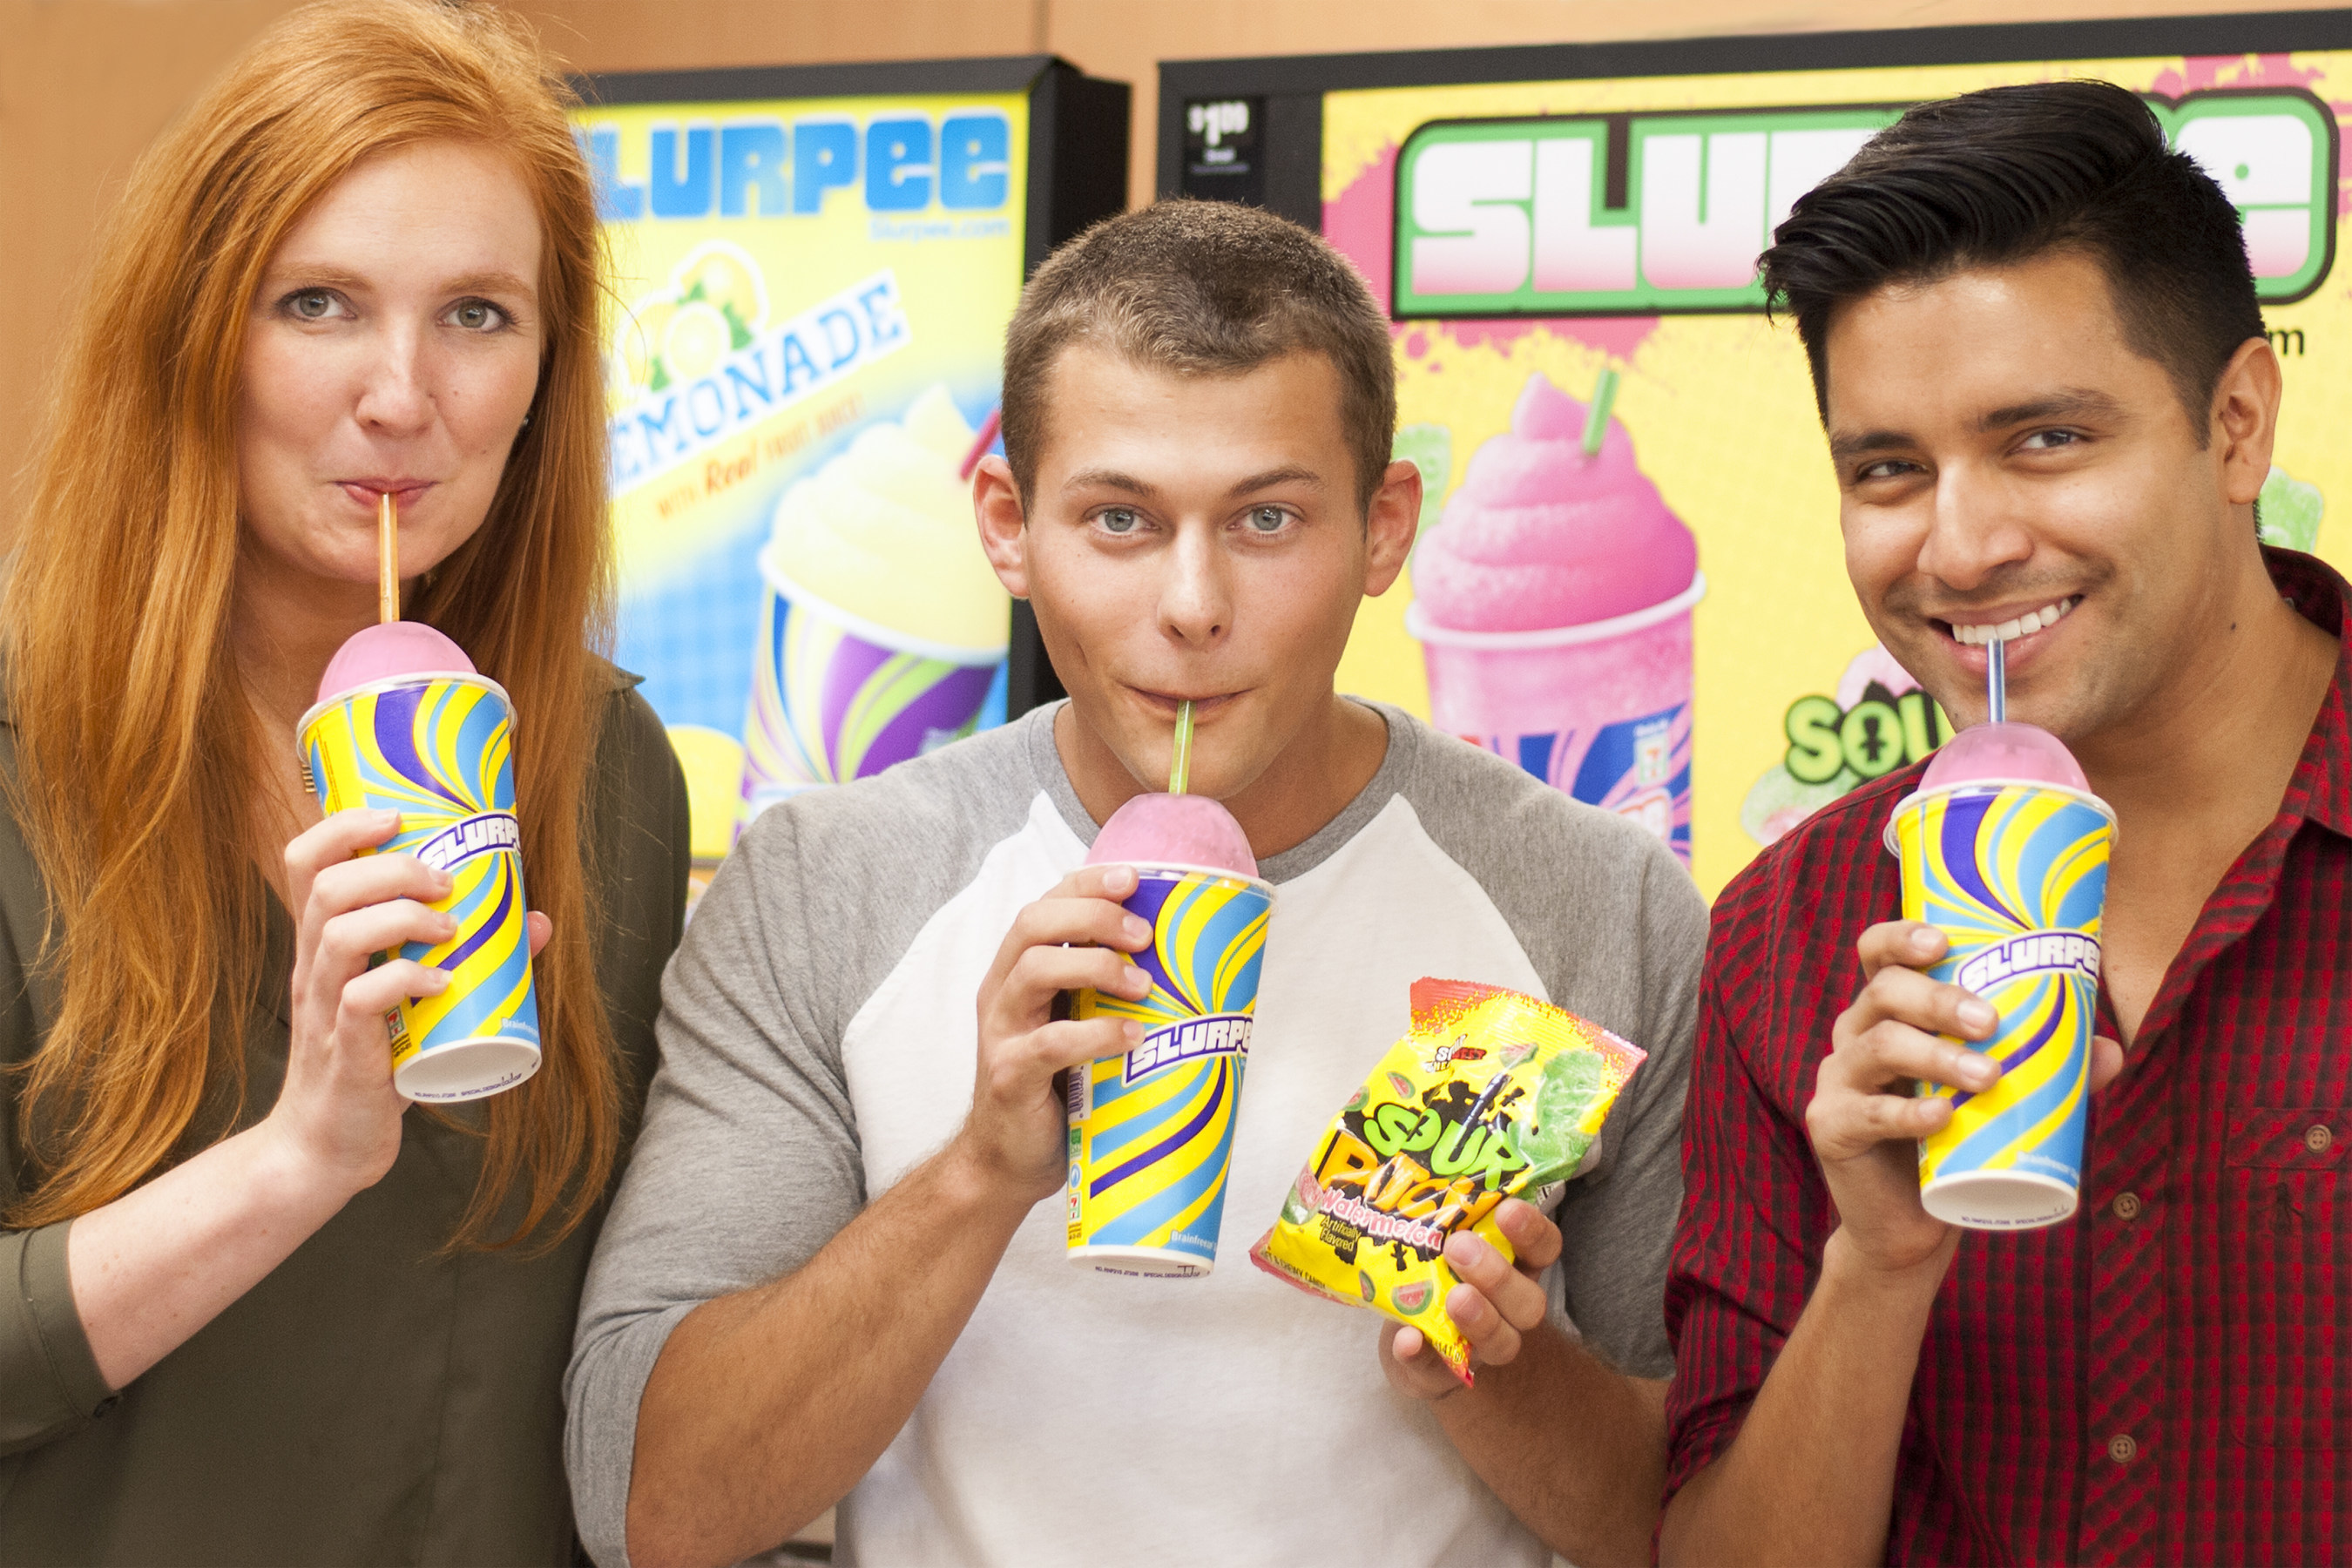 7-Eleven(R) and SOUR PATCH KIDS partner for New SOUR PATCH(R) Watermelon flavored Slurpee(R). The newest Slurpee flavor will be exclusively available at participating 7-Eleven stores beginning July 1.